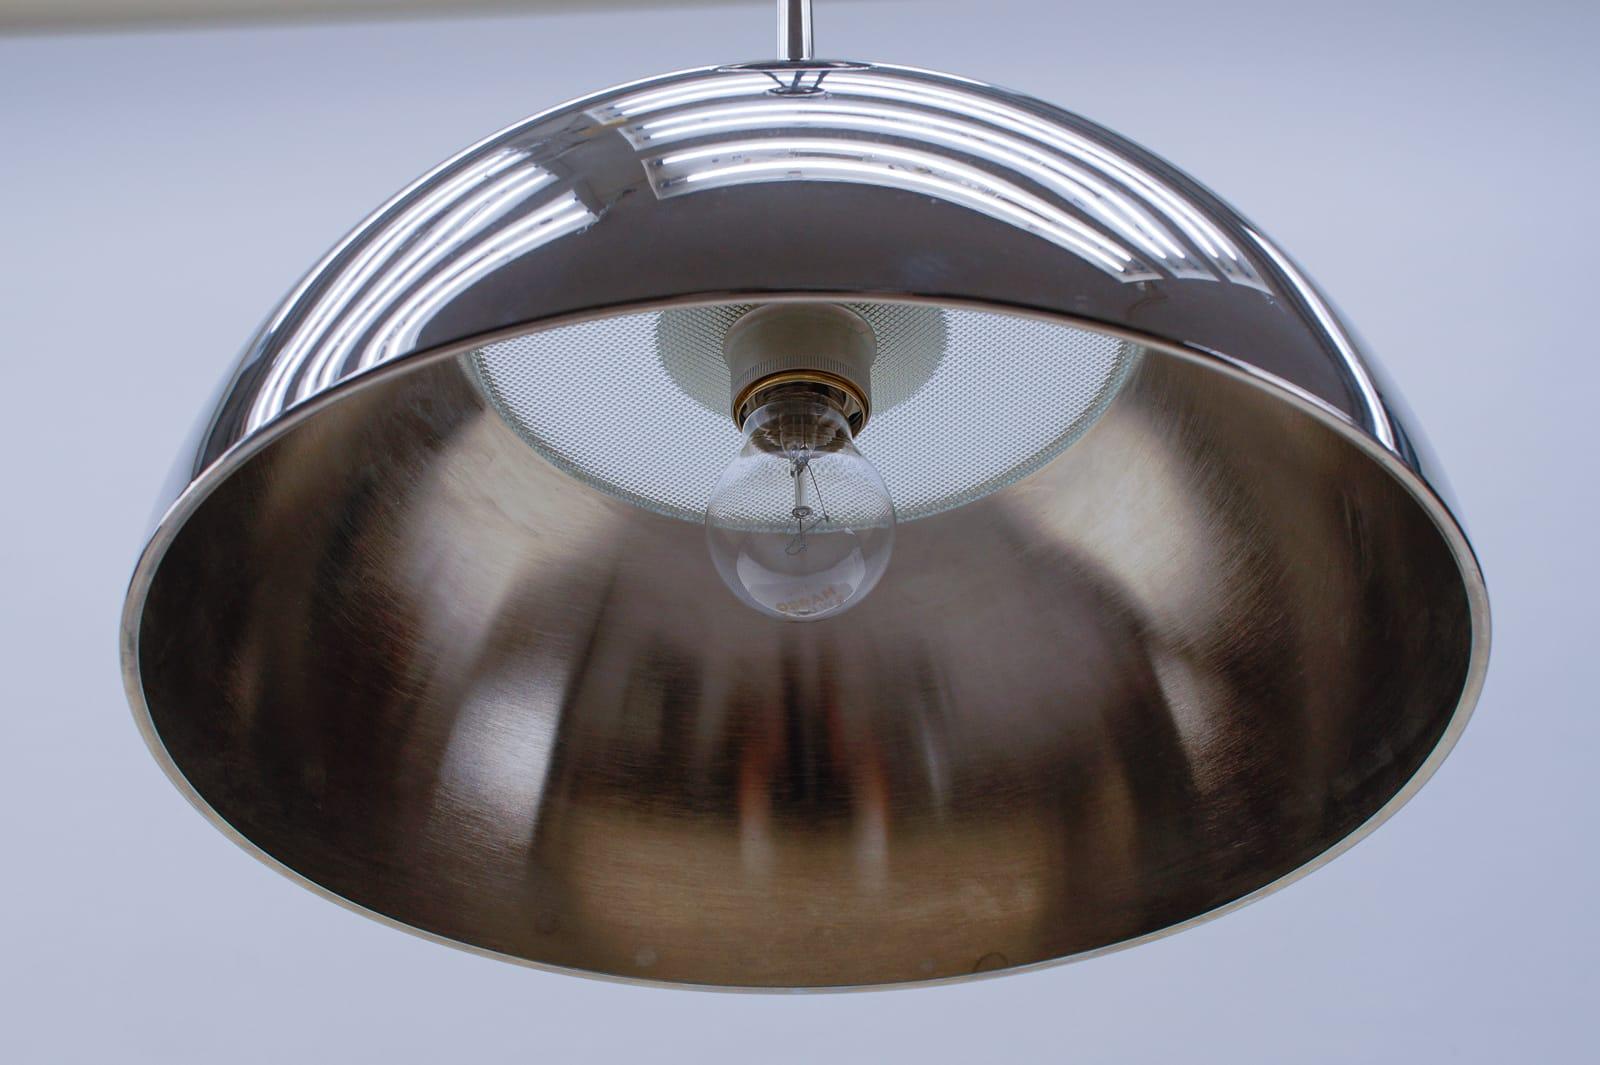 Florian Schulz Nickel Plated Pendant Lamp with Counterweight, Germany, 1970s For Sale 3